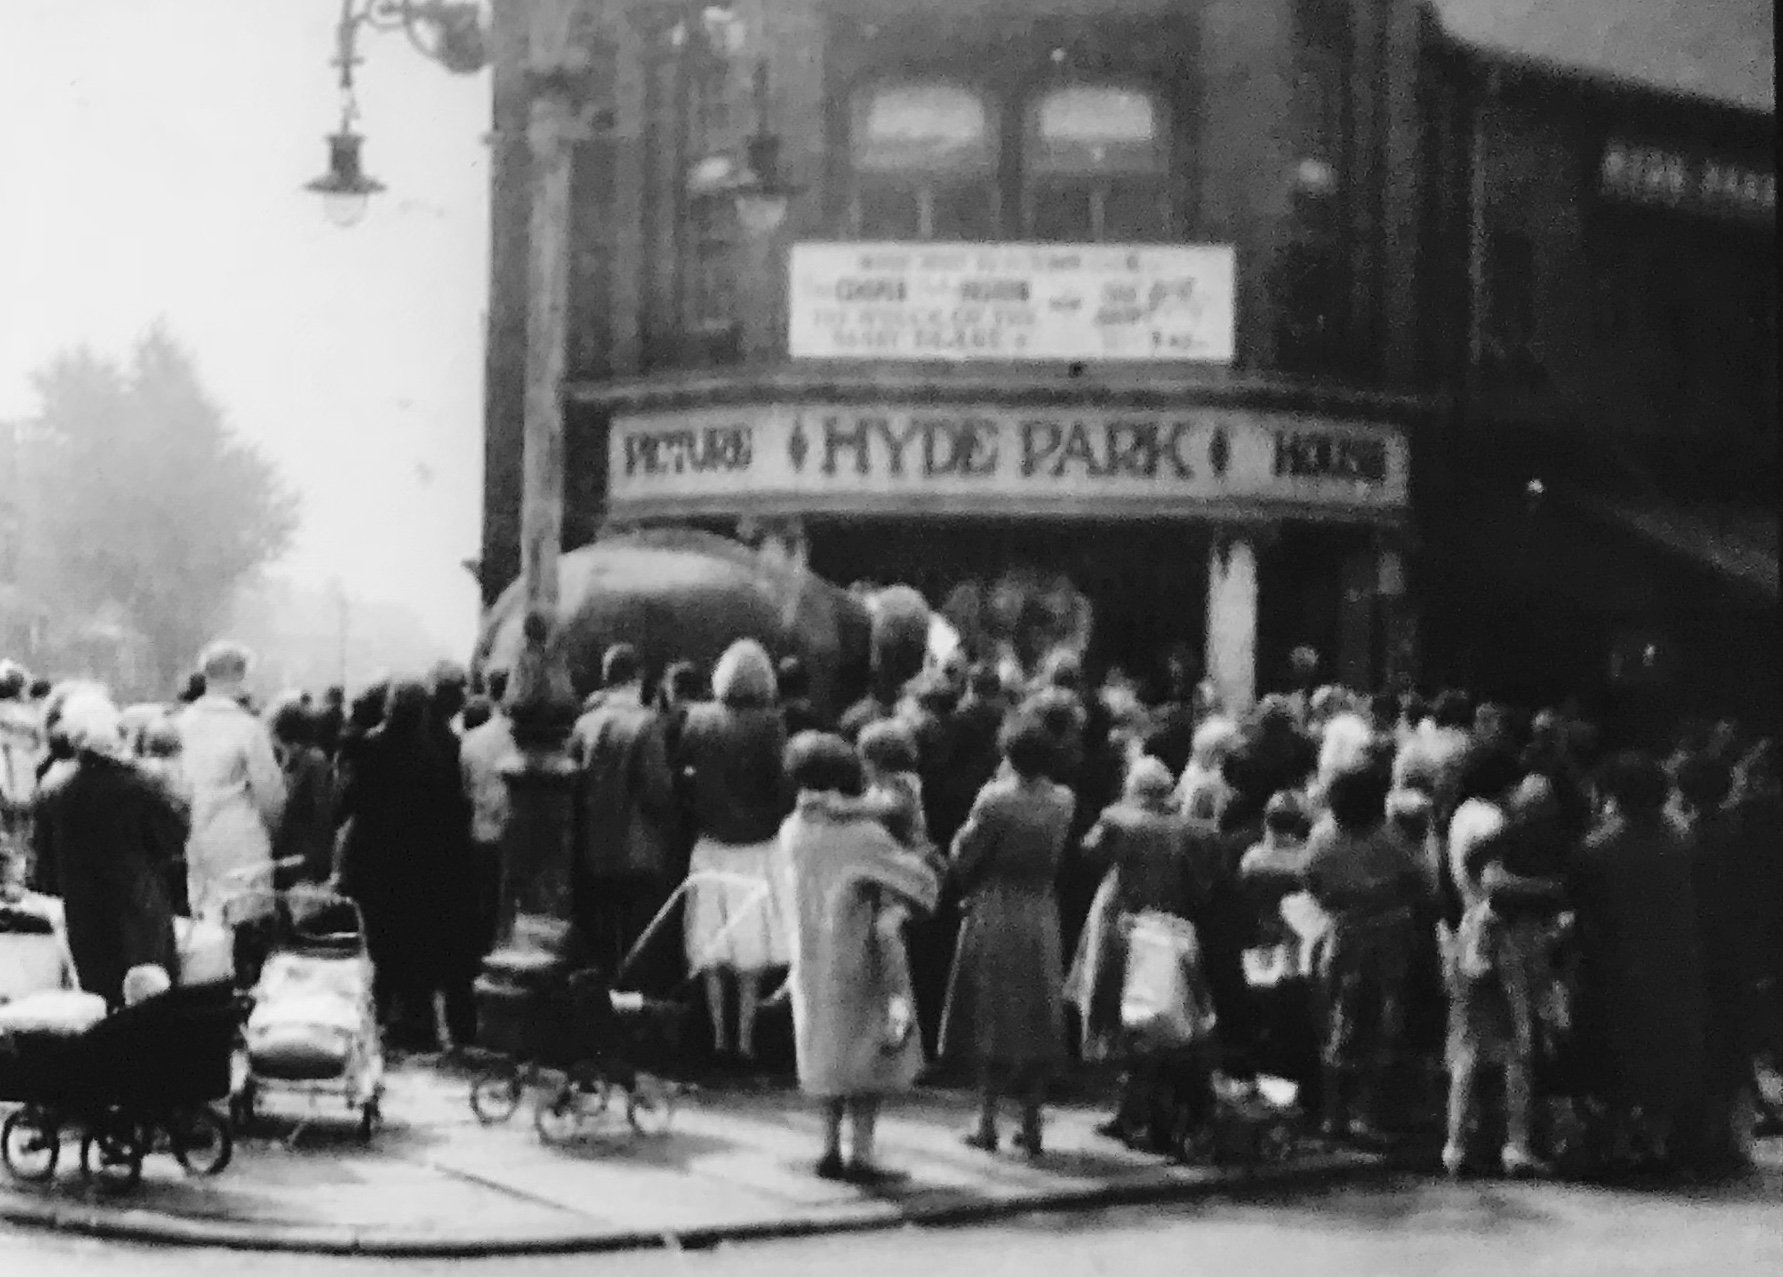 Elephant at Hyde Park Picture House, 1959